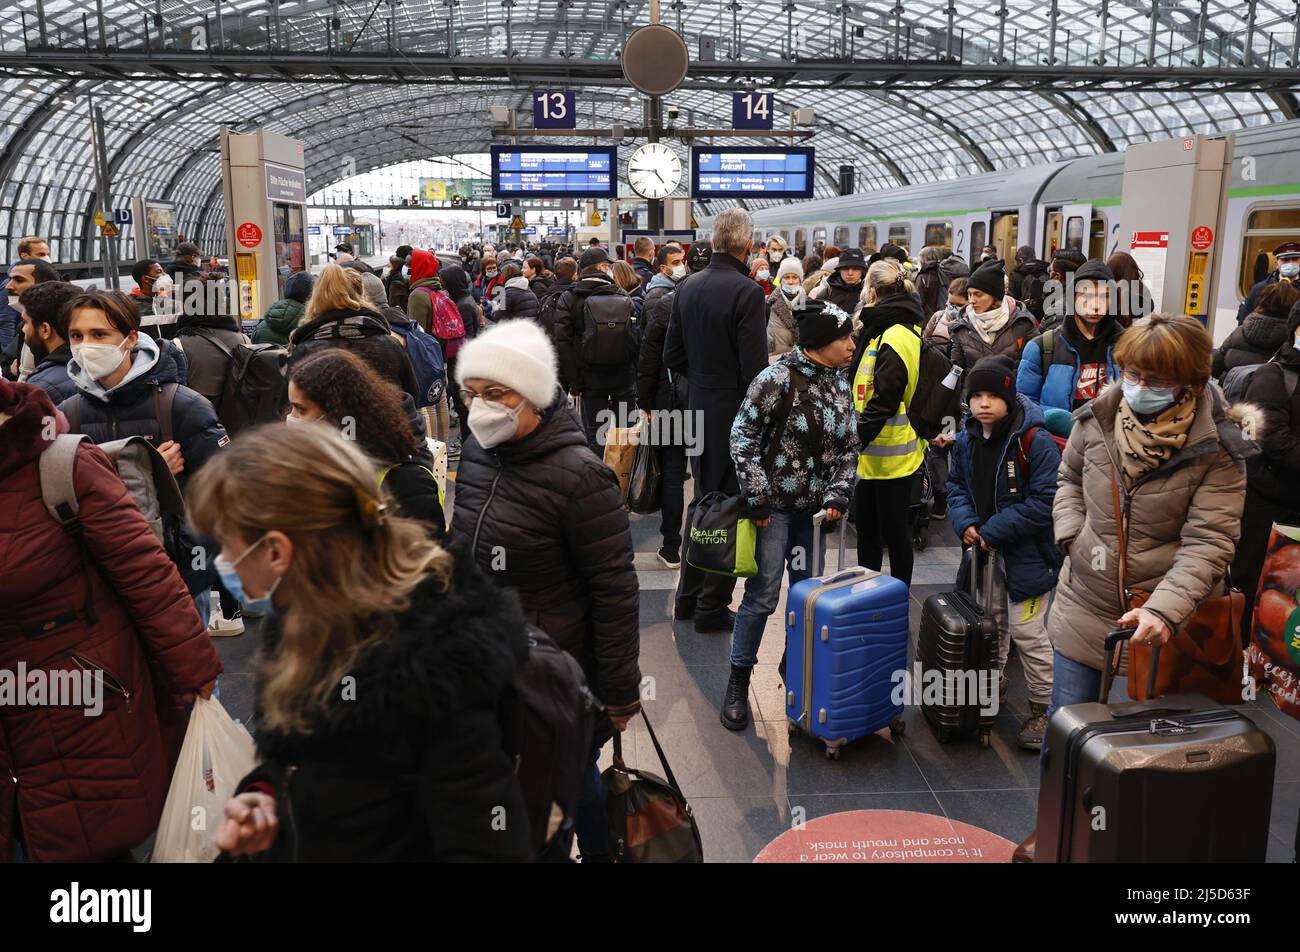 Berlin, 03.03.2022 - Refugees from Ukraine arriving at Berlin Central Station. Thousands of refugees from Ukraine have already arrived in Germany. [automated translation] Stock Photo